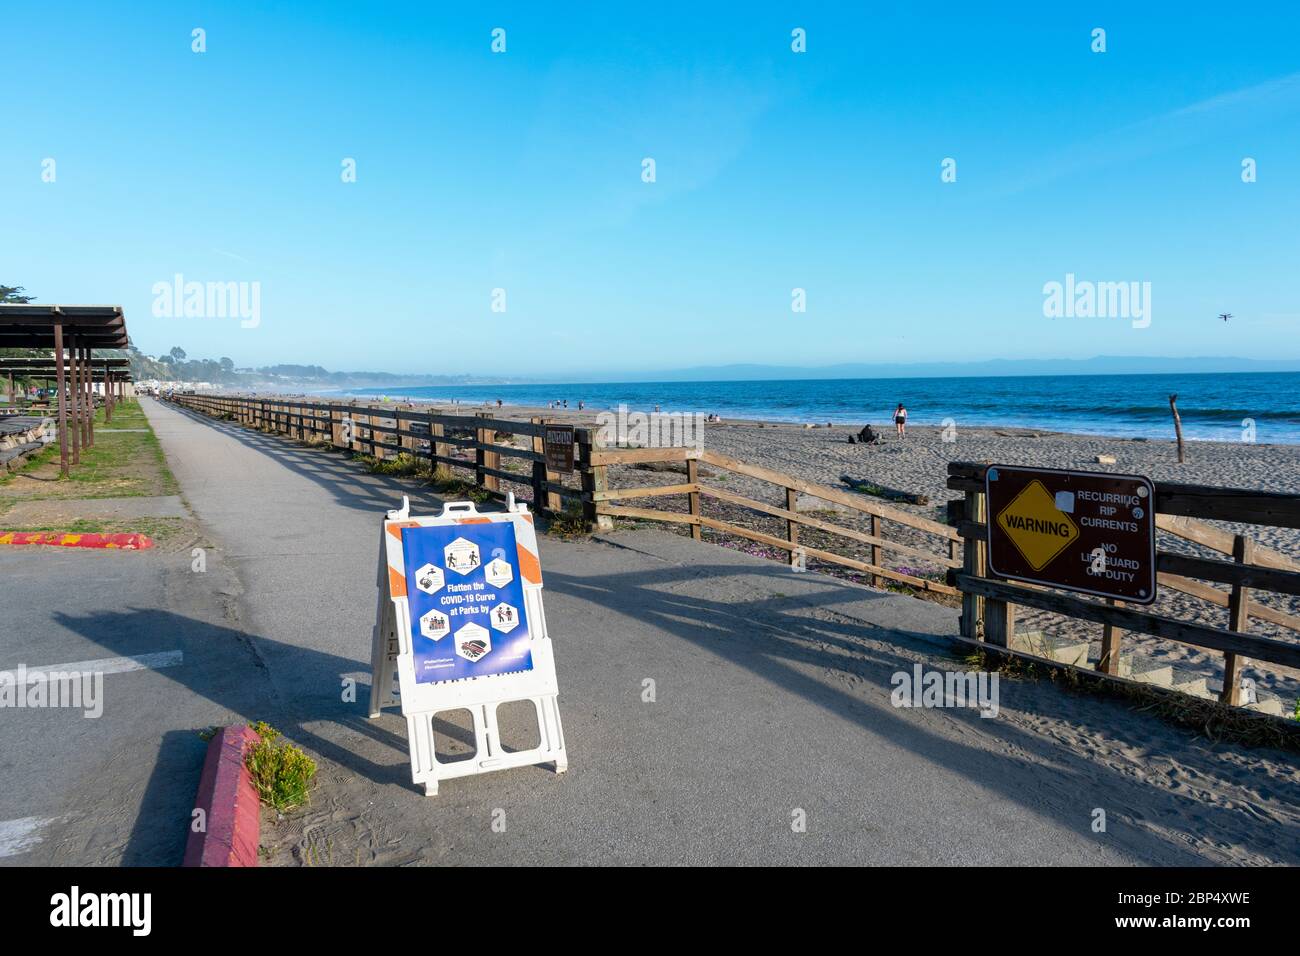 Sign on trail for state park beach visitors to practice social distancing and flatten the curve to prevent spread COVID-19 - Santa Cruz, California, U Stock Photo